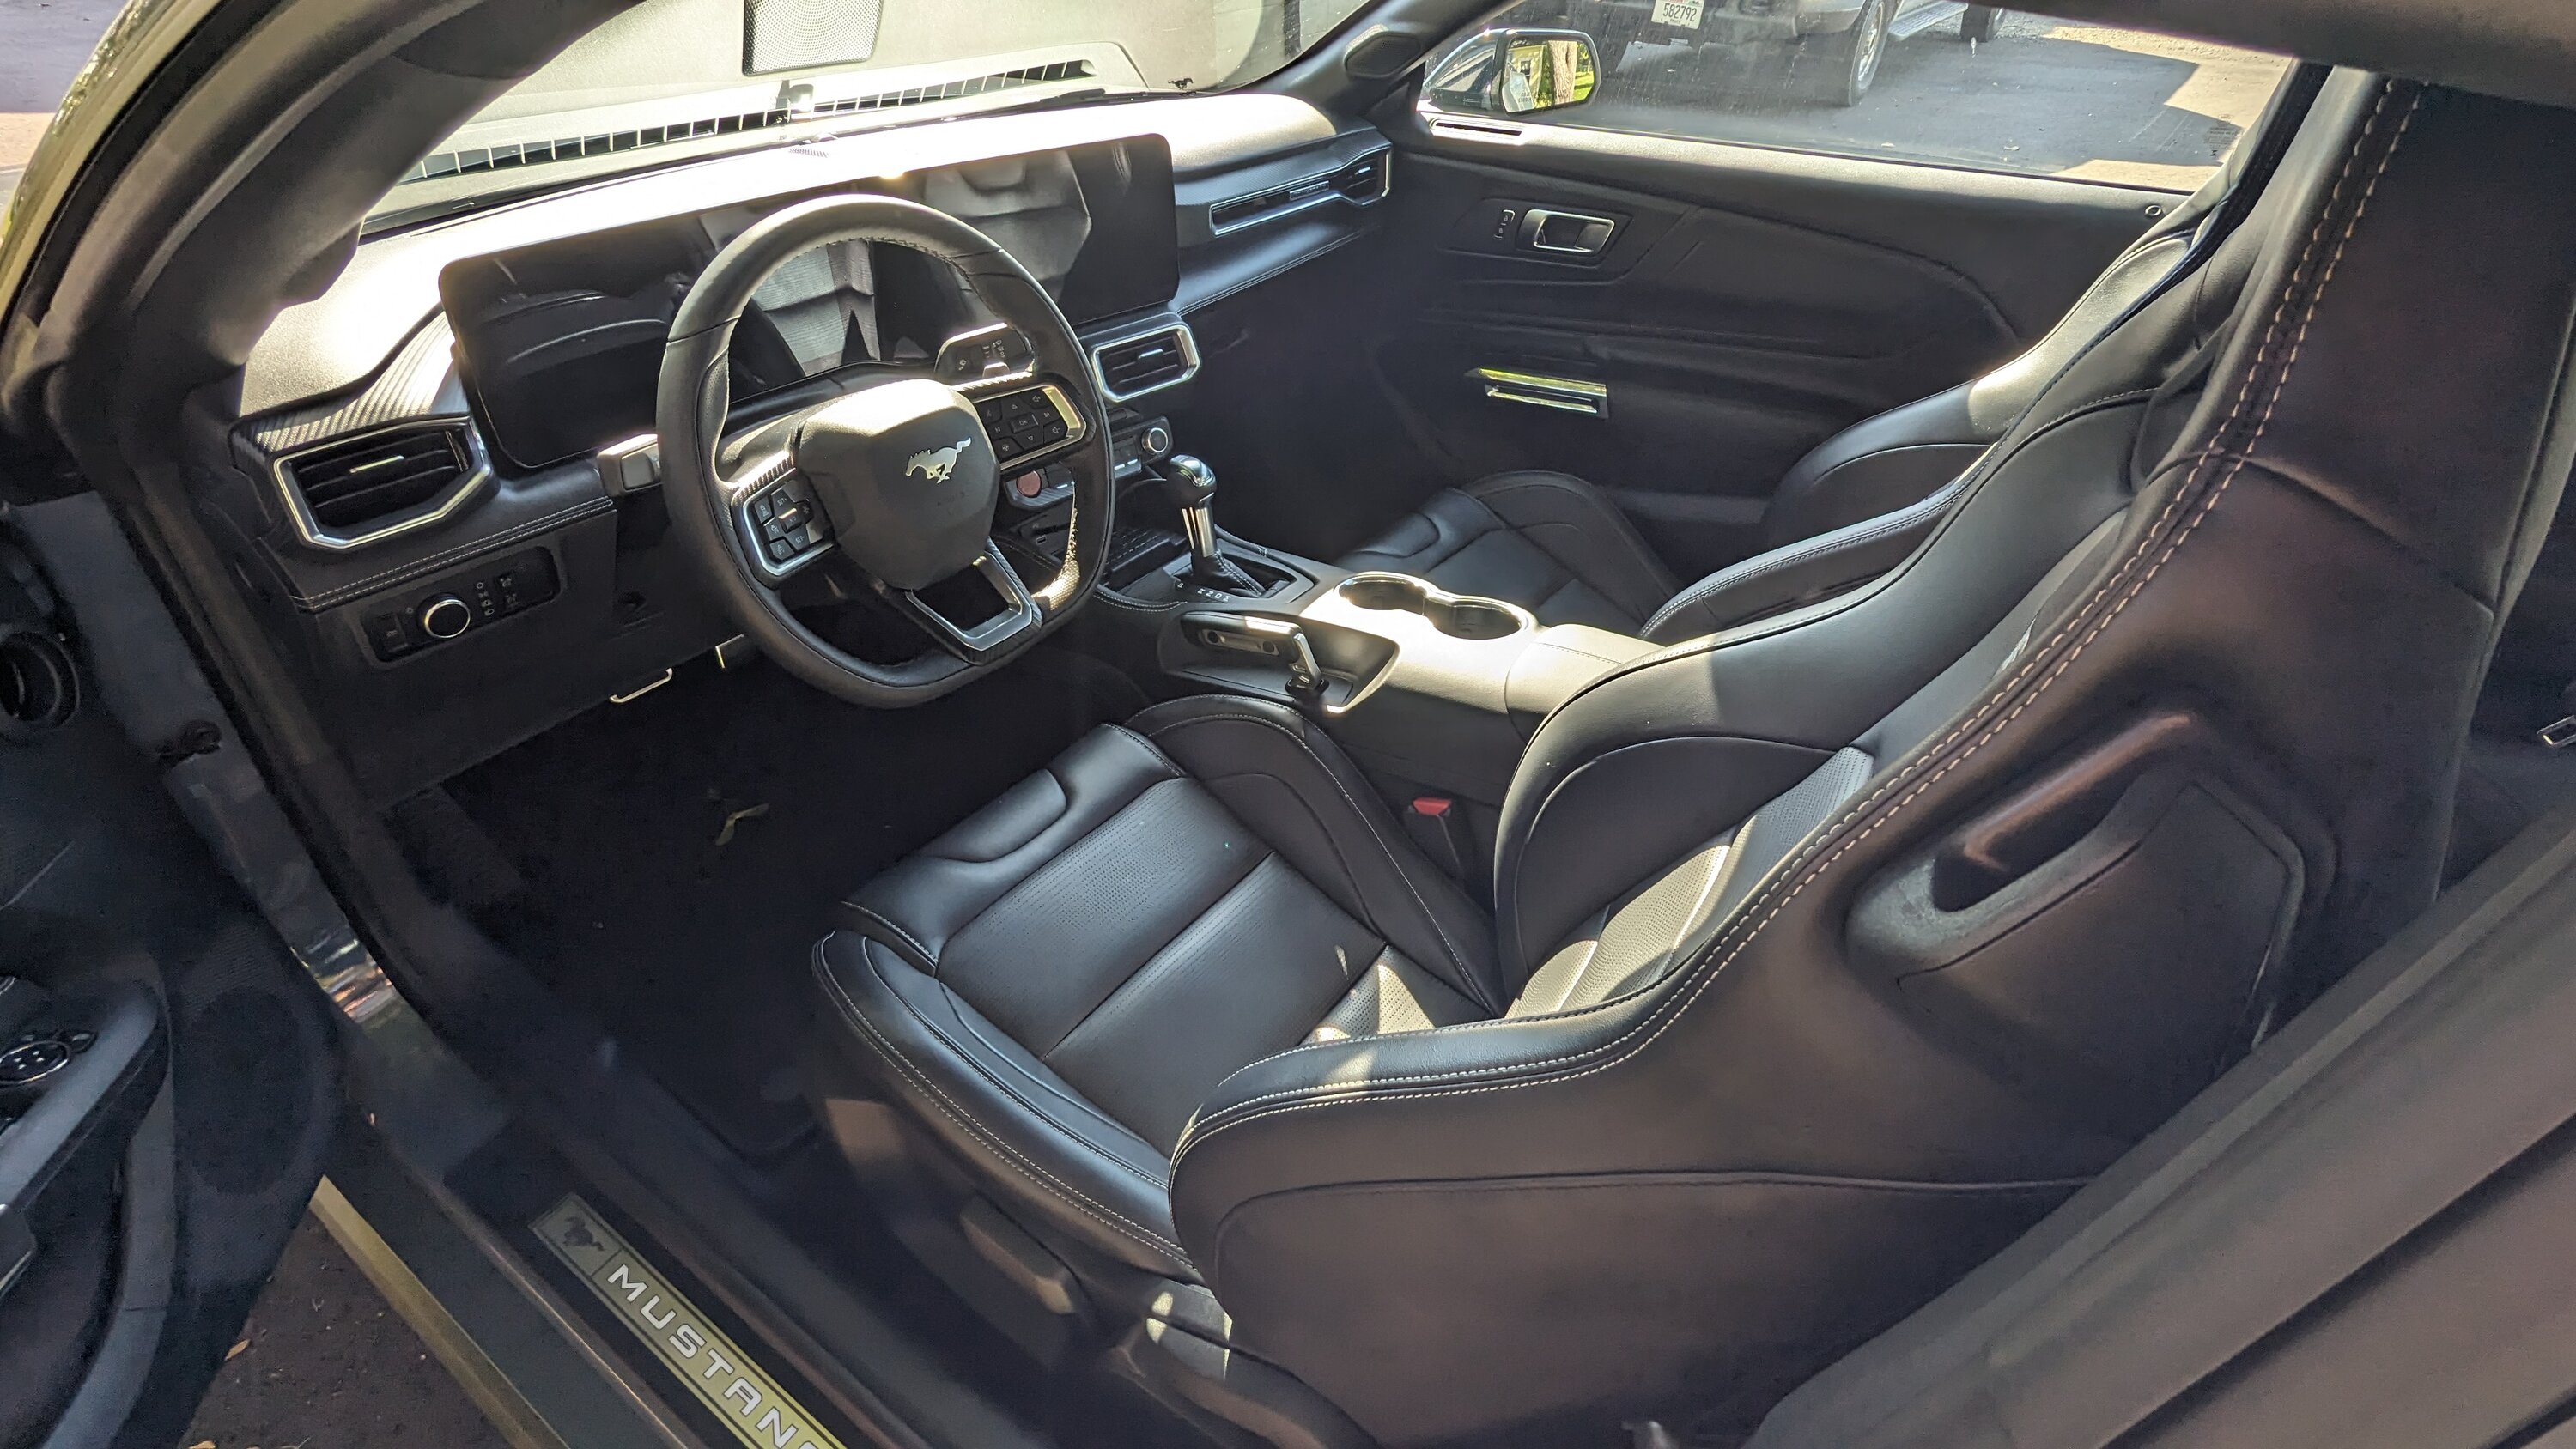 S650 Mustang Let’s post interior photos here! PXL_20231002_201457221